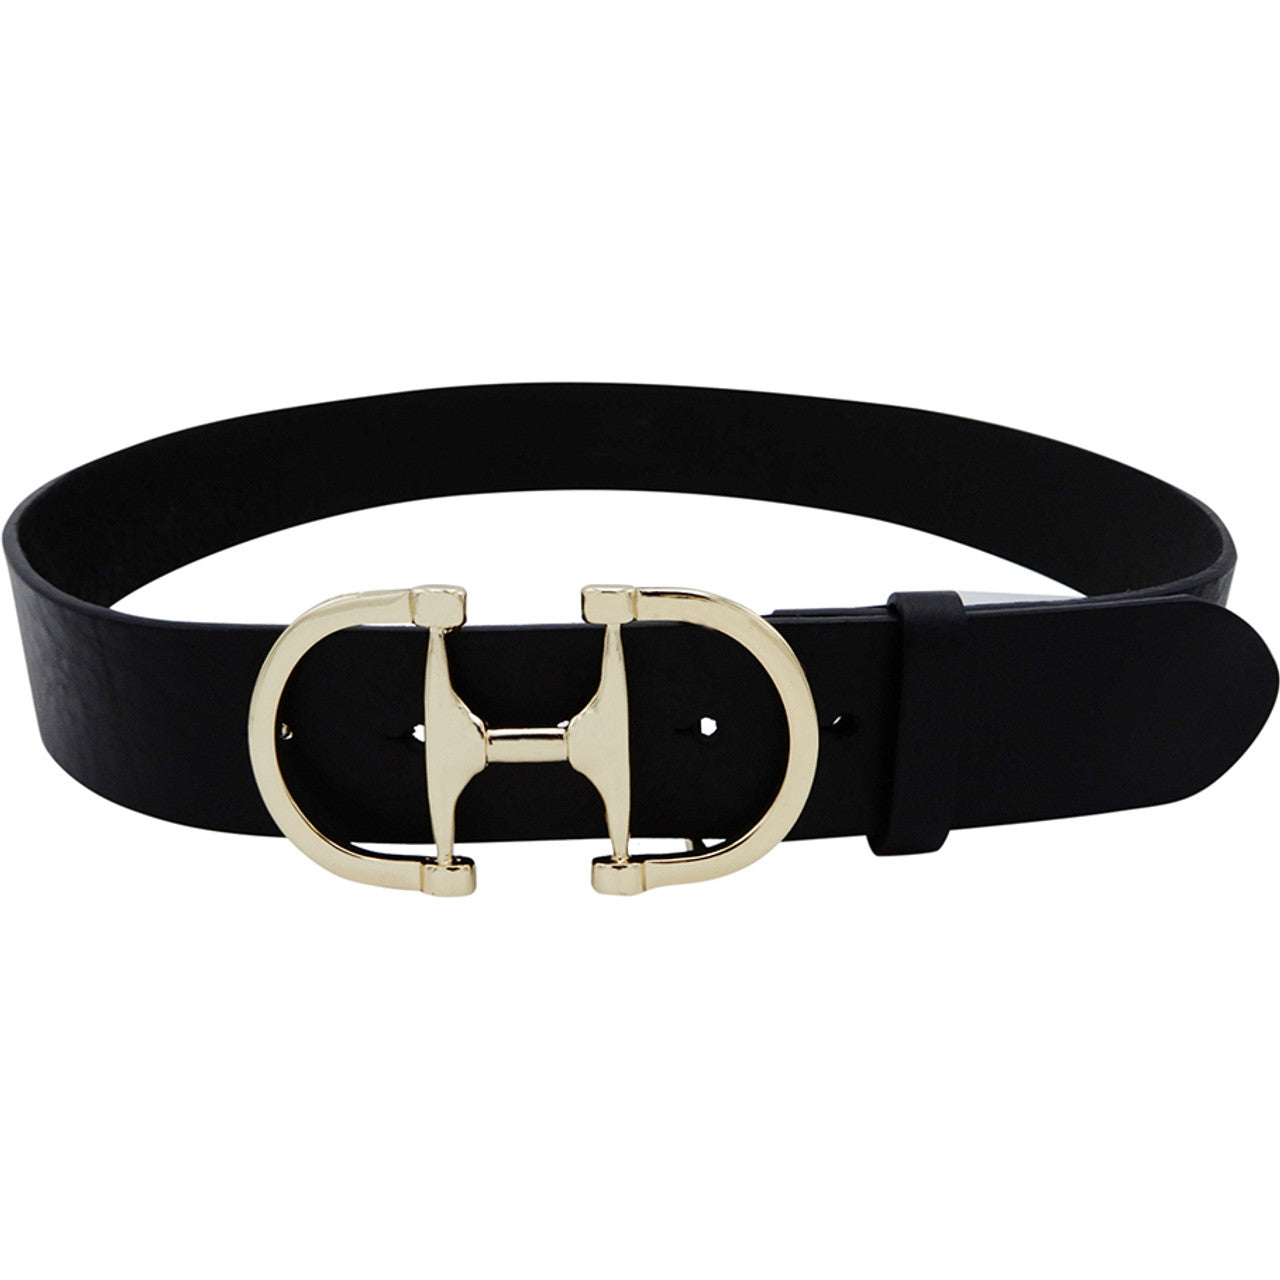 Lilo Collections 1.5" Bilbao Leather Belt - Black